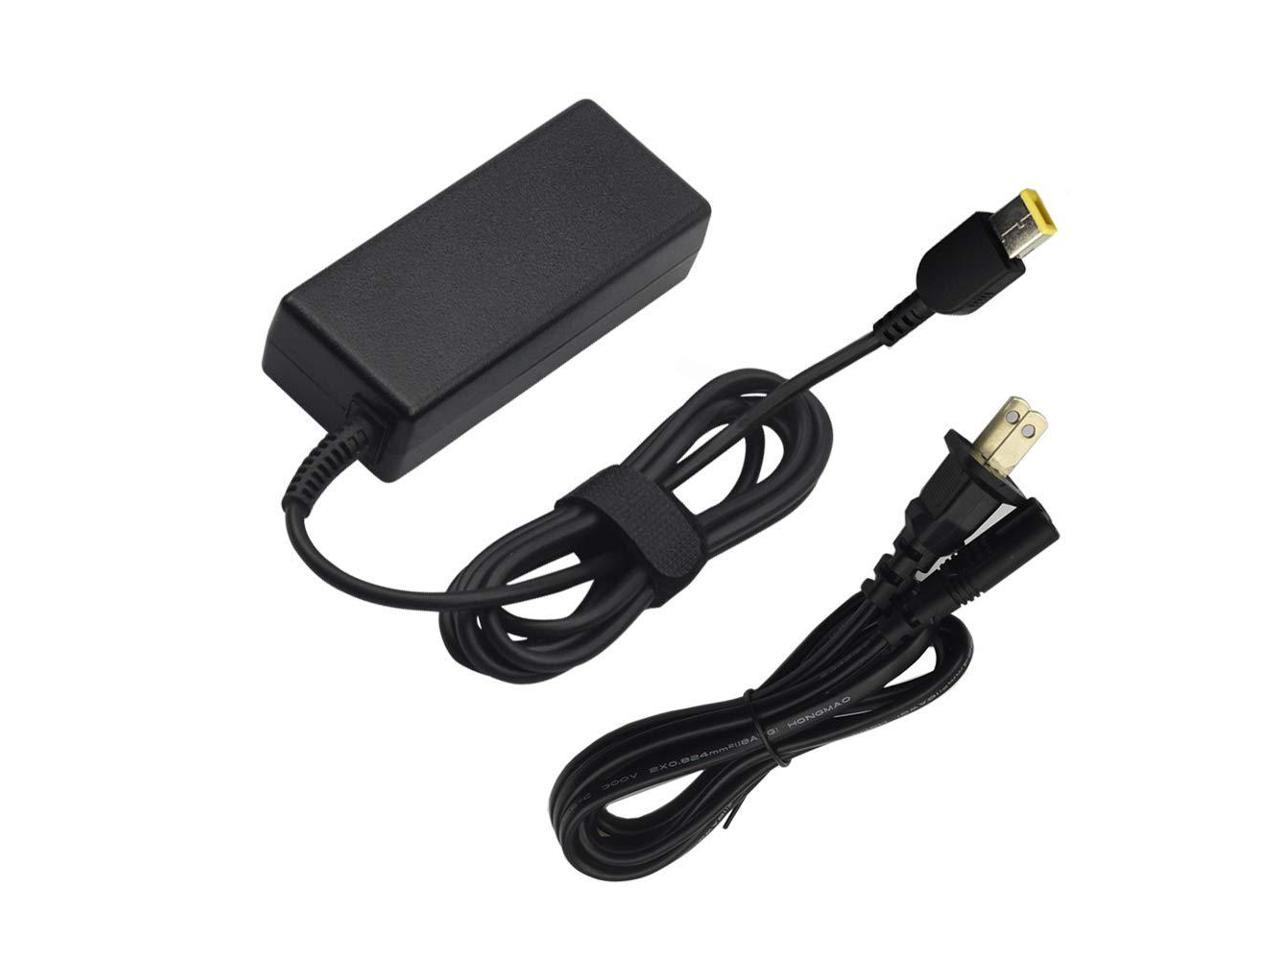 Dexpt 65w Ac Adapter Charger Compatible Lenovo Thinkpad Yoga 260 370 460 300 500 2 Pro 14 11s P40 B40 B50 B40 30 B40 70 B40 45 B40 80 B50 30 B50 45 B50 70 B50 80 Laptop Power Supply Cord Ul Listed Newegg Com